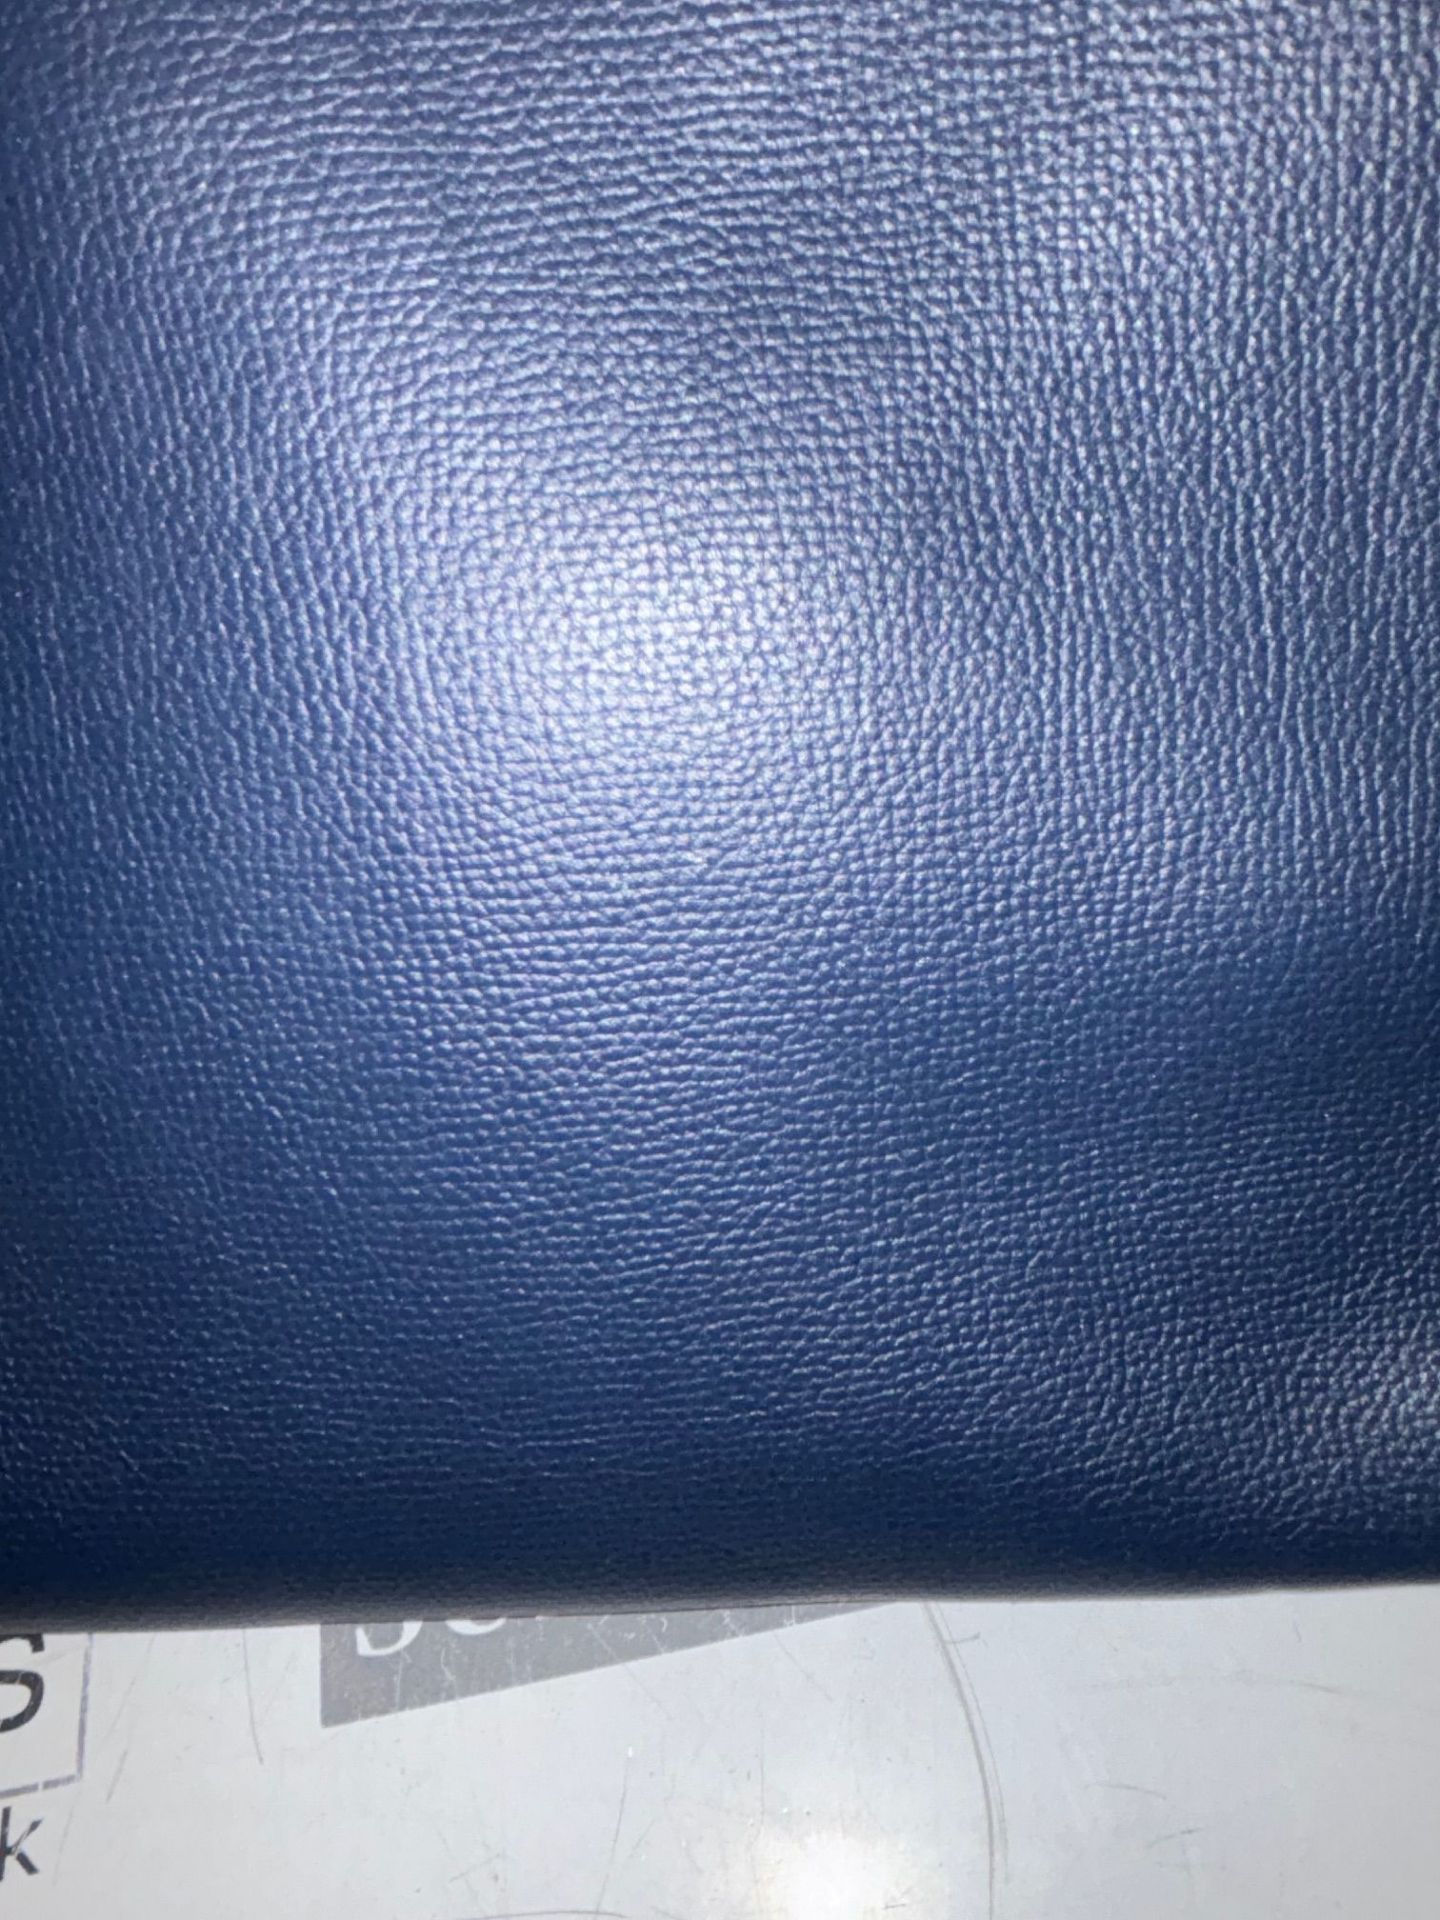 Genuine Burberry banner leather handbag Navy. (strap not included) - Image 7 of 12